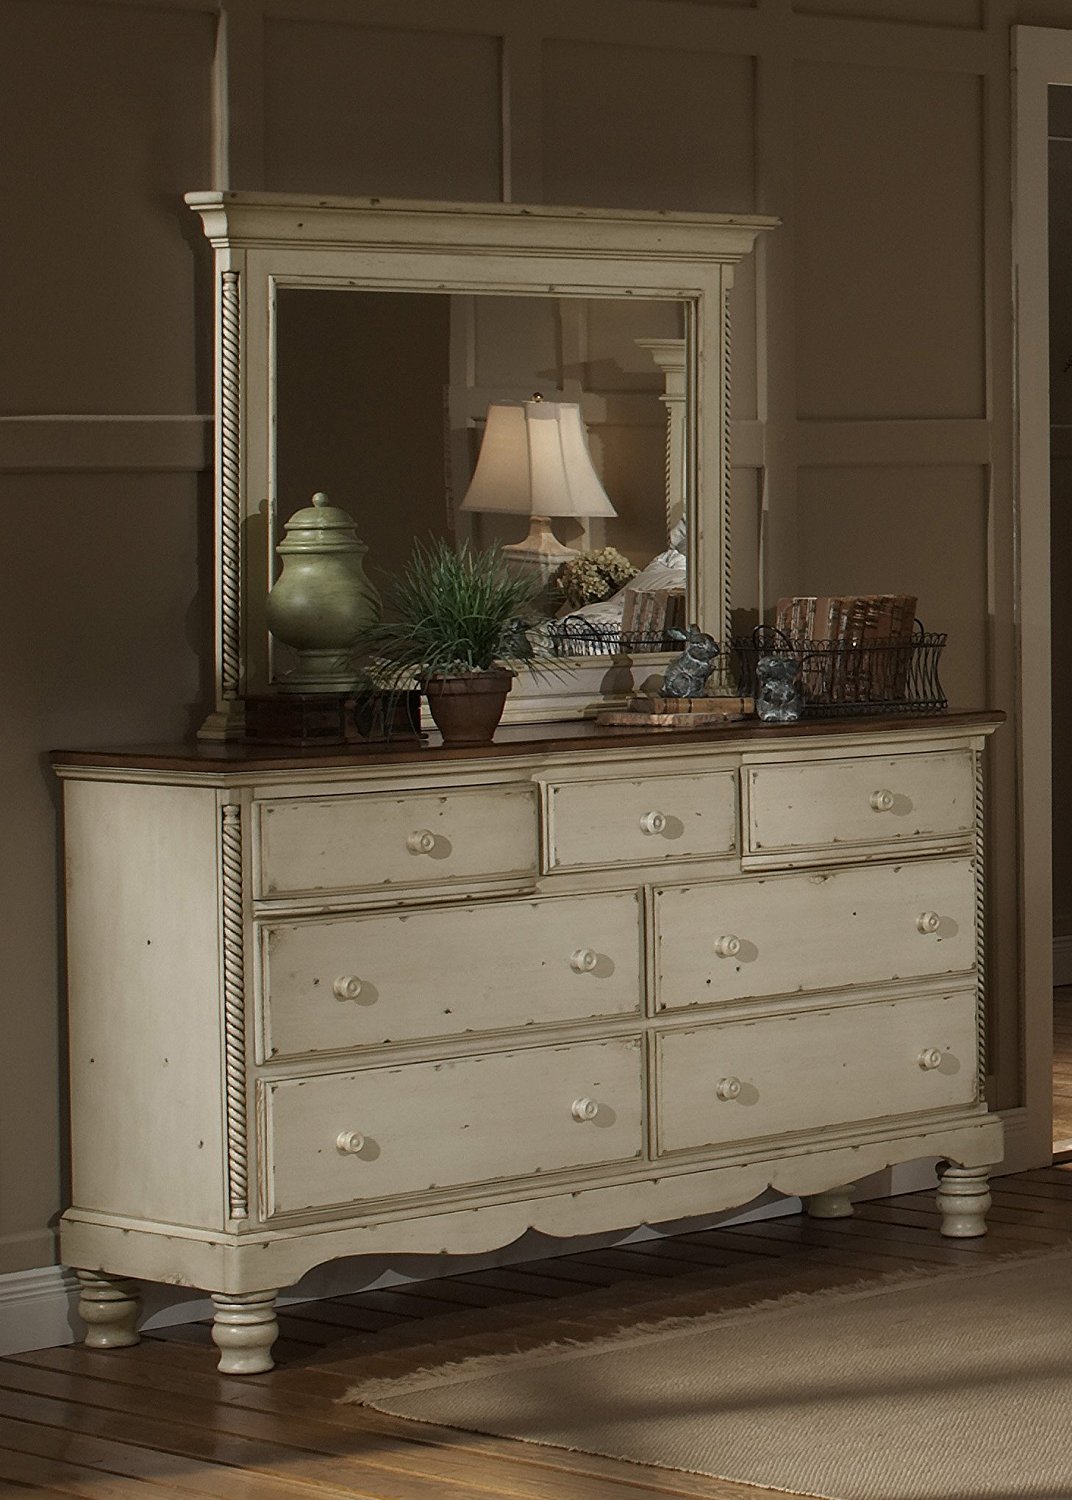 Diy Antique White Dresser And Its Customized Design Concept